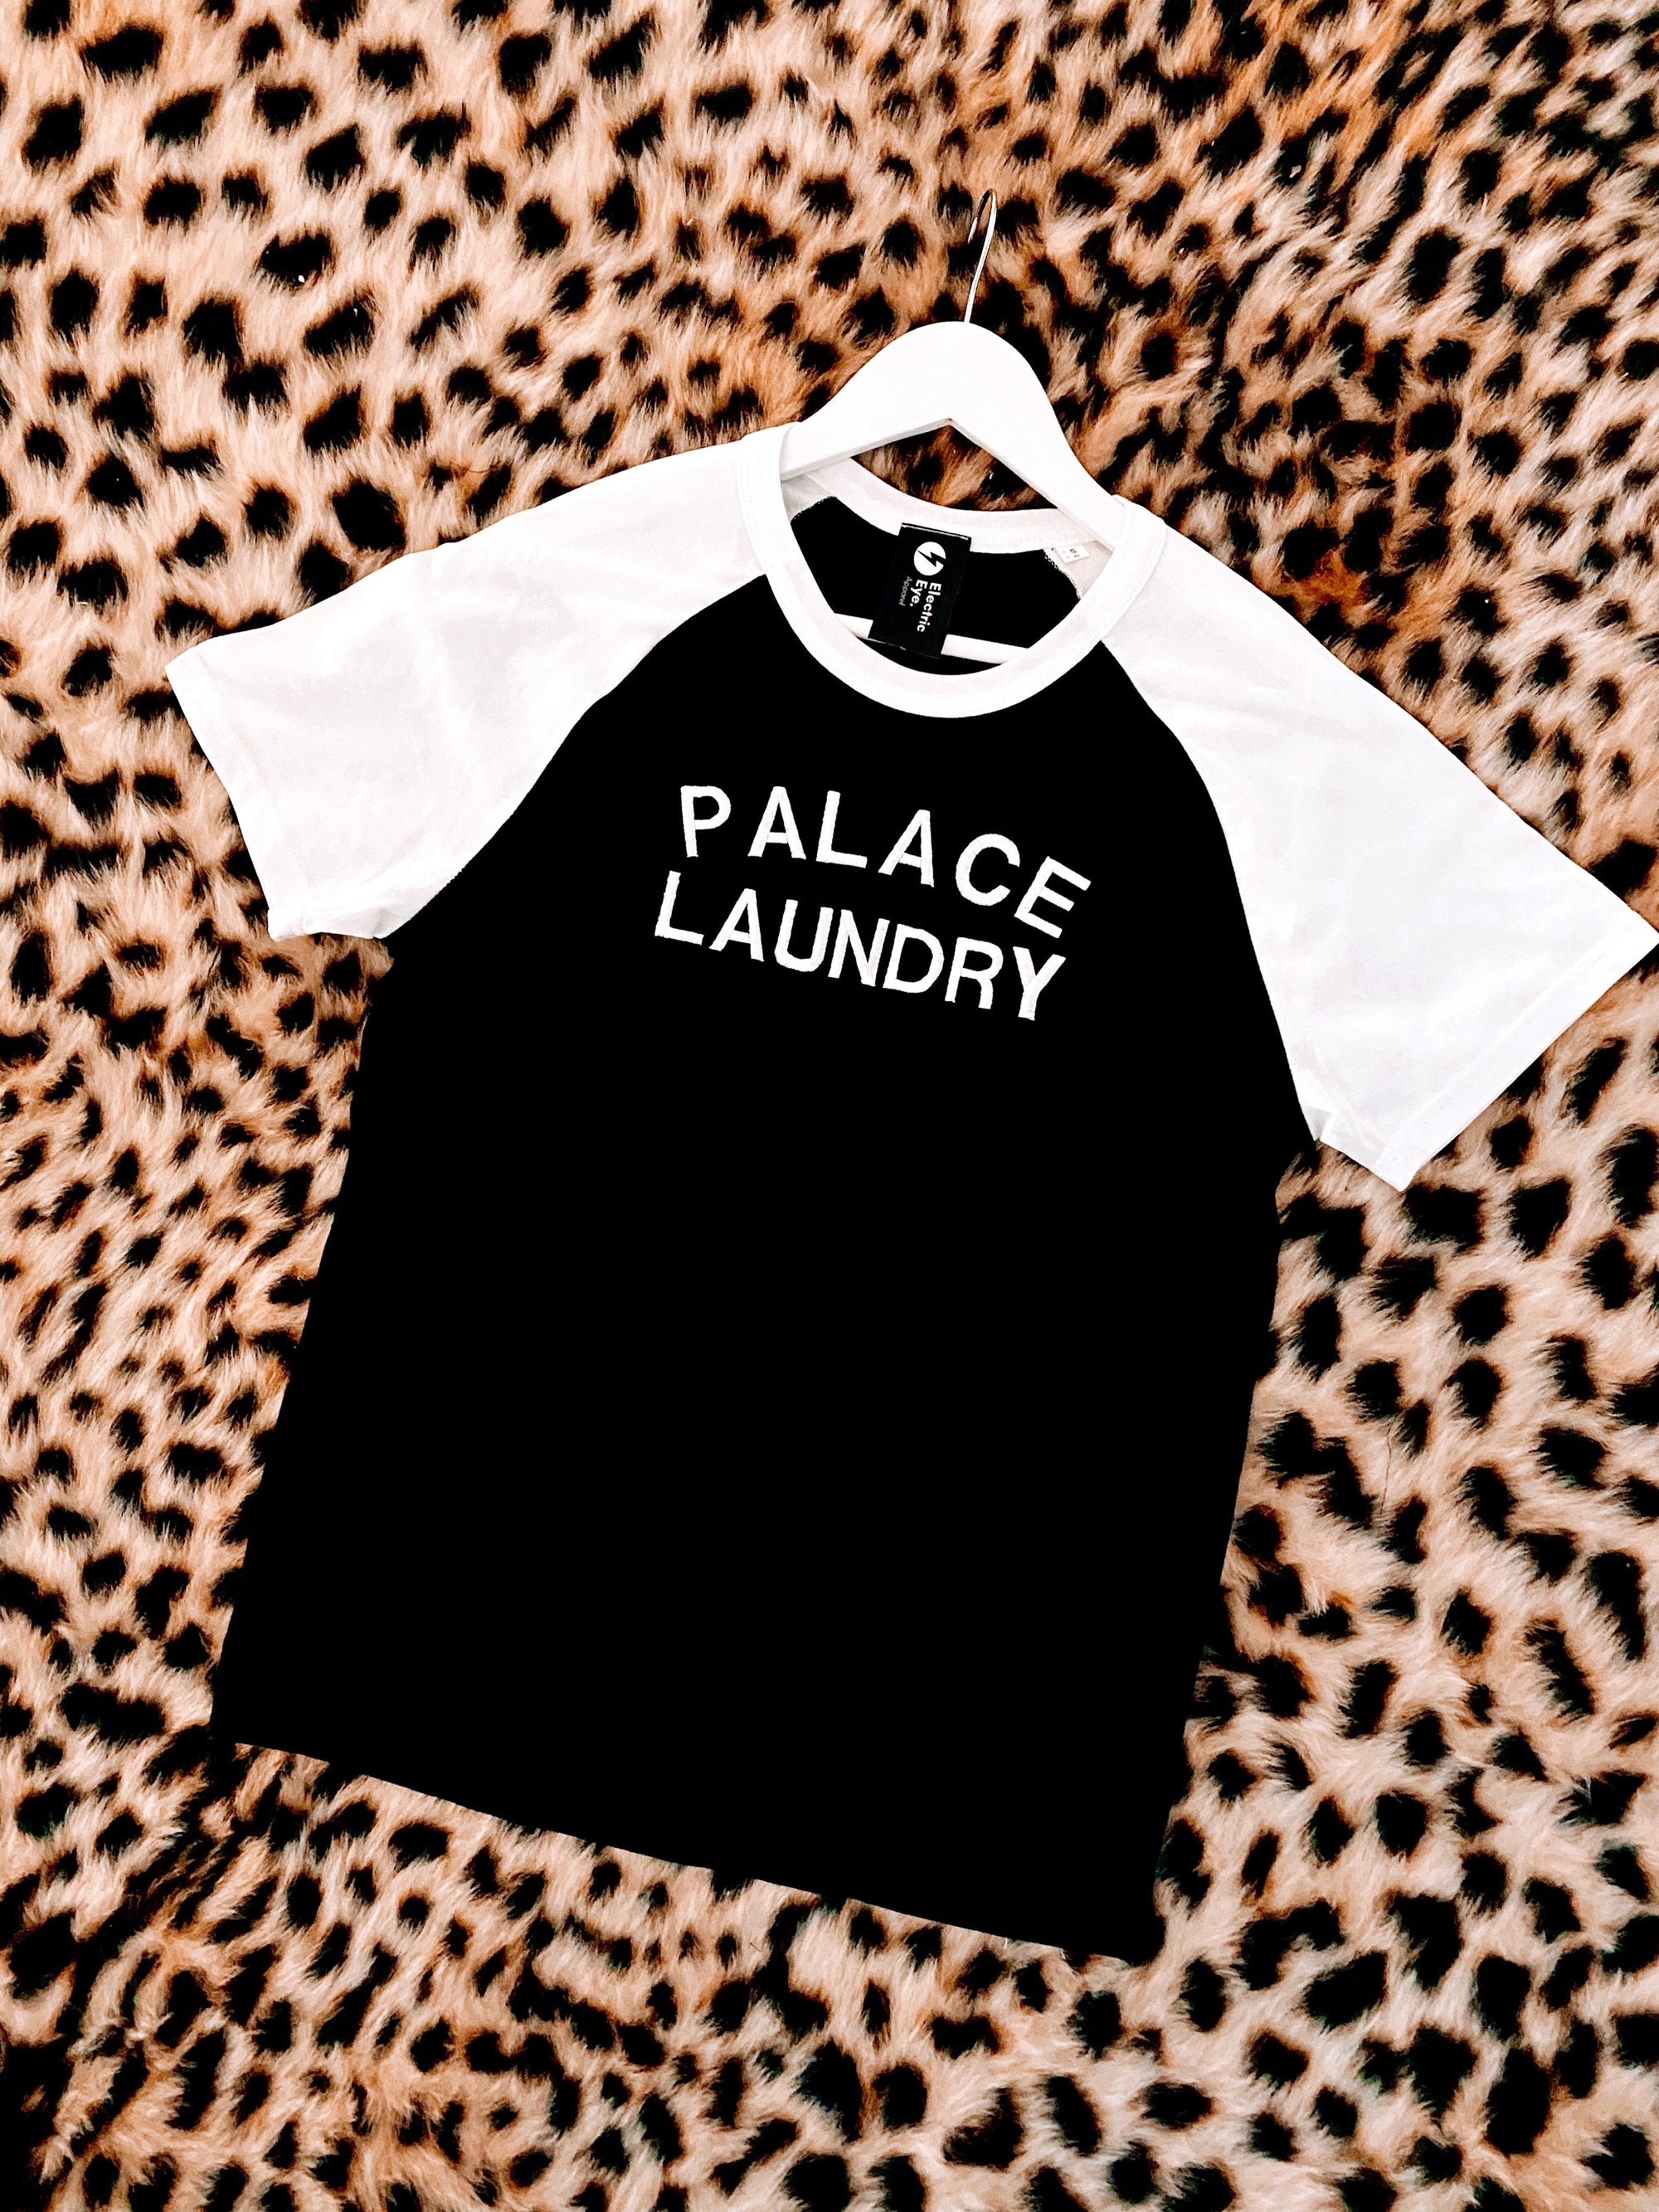 SAMPLE SALE ‘PALACE LAUNDRY’ EMBROIDERED UNISEX VINTAGE STYLE RAGLAN T-SHIRT (inspired by Mick Jagger) (SIZE XXS)